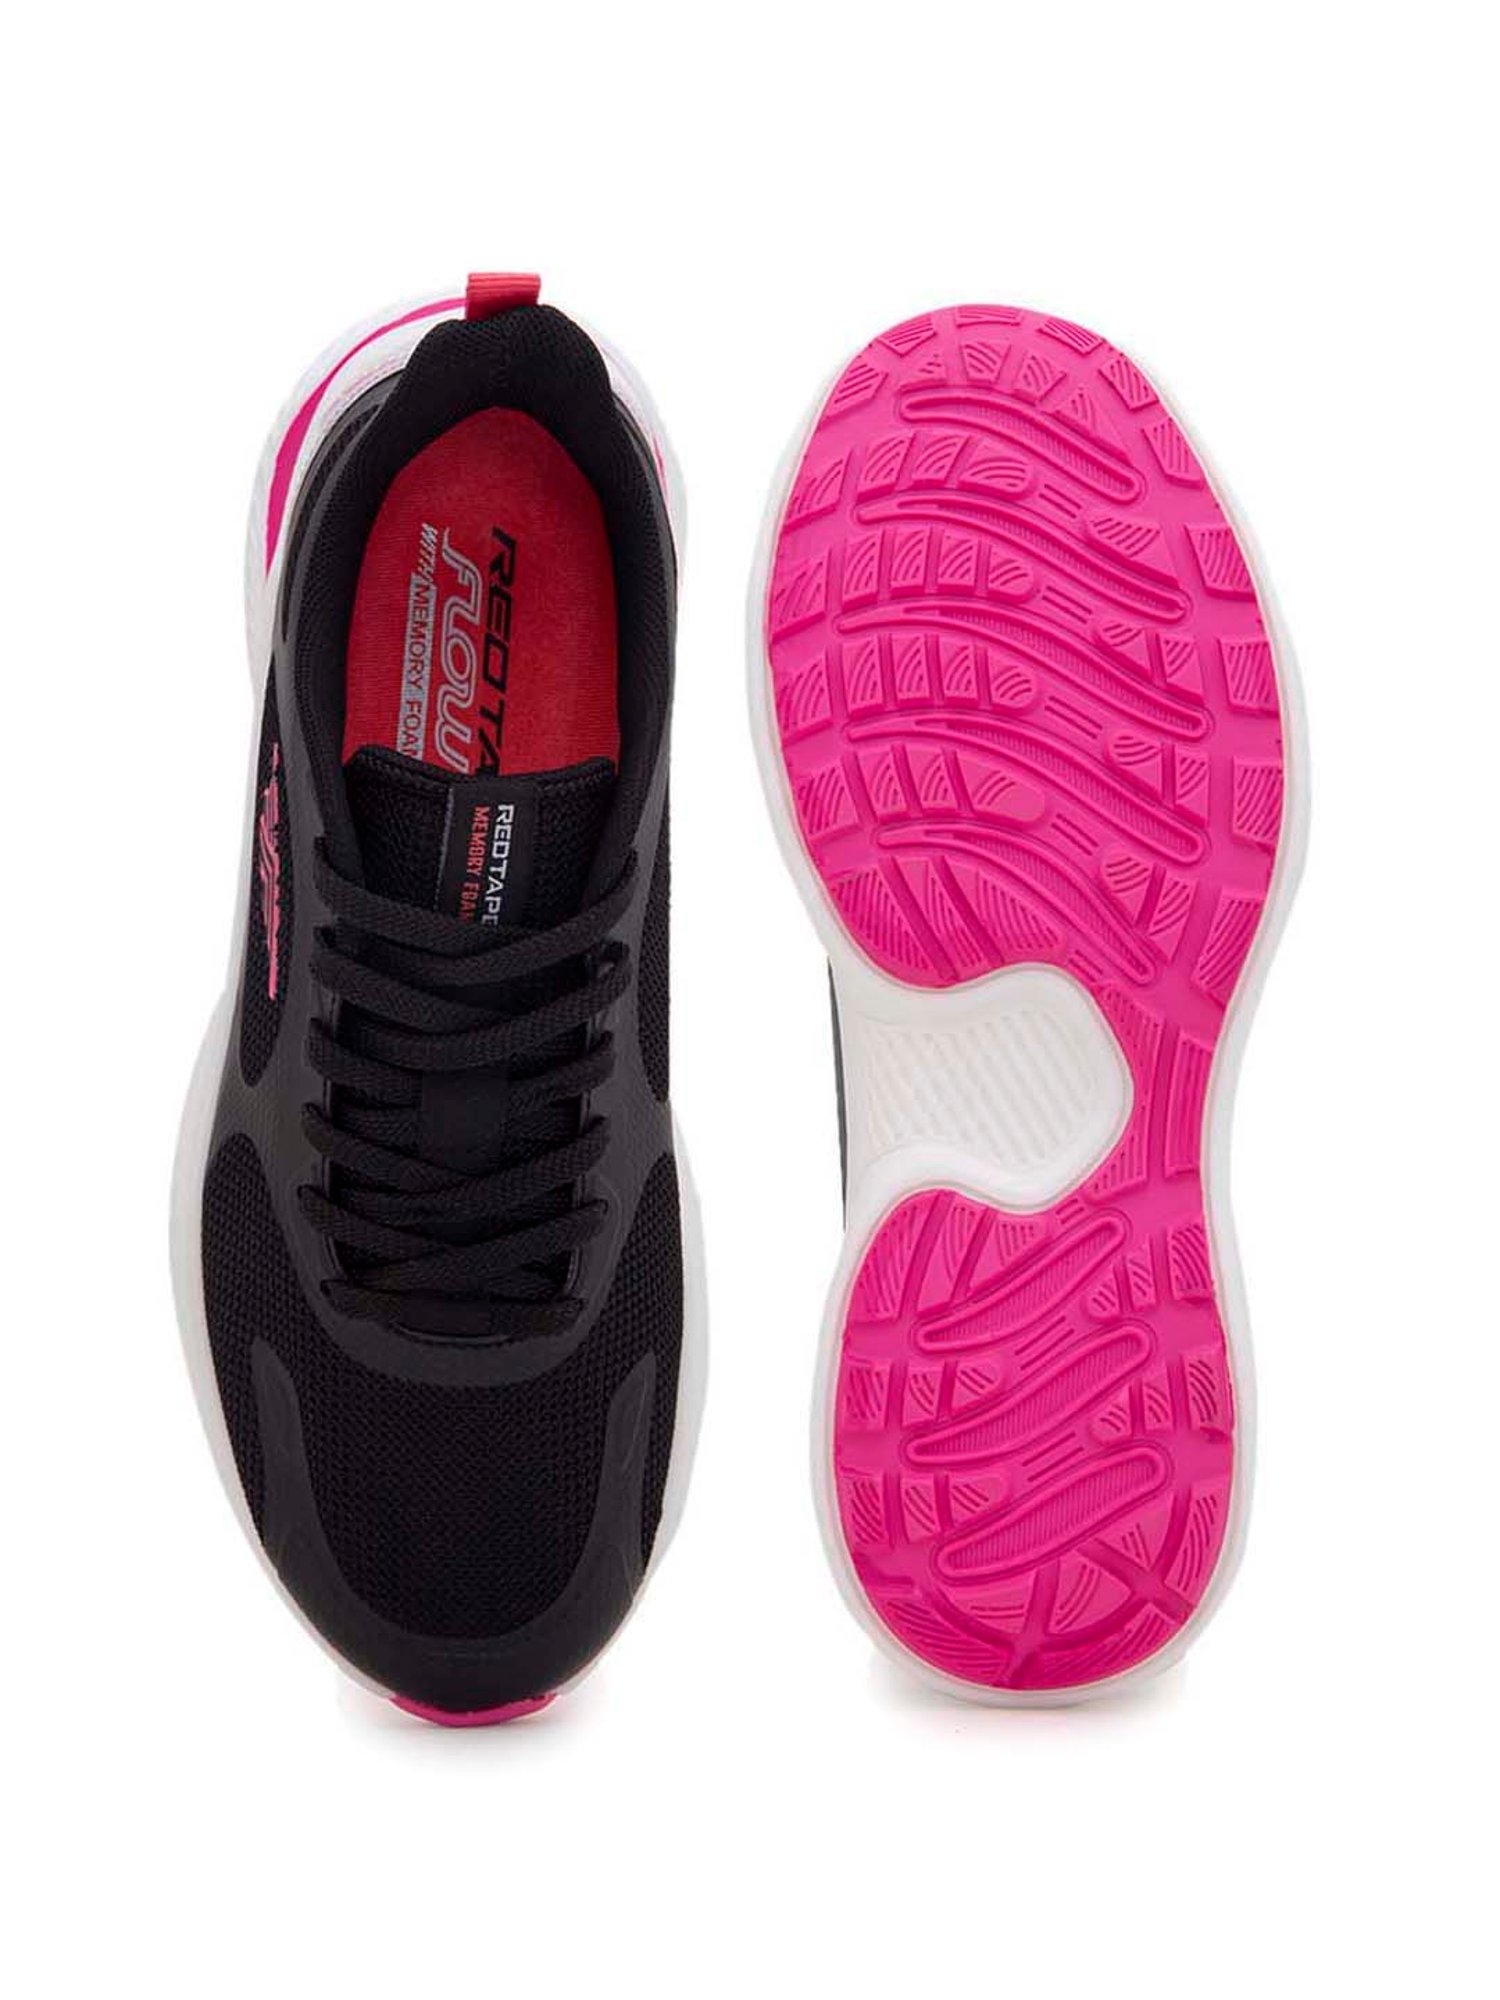 Buy Red Tape Casual Sneaker Shoes for Women | Comfortable & Slip  Resistant-3 White and Black at Amazon.in